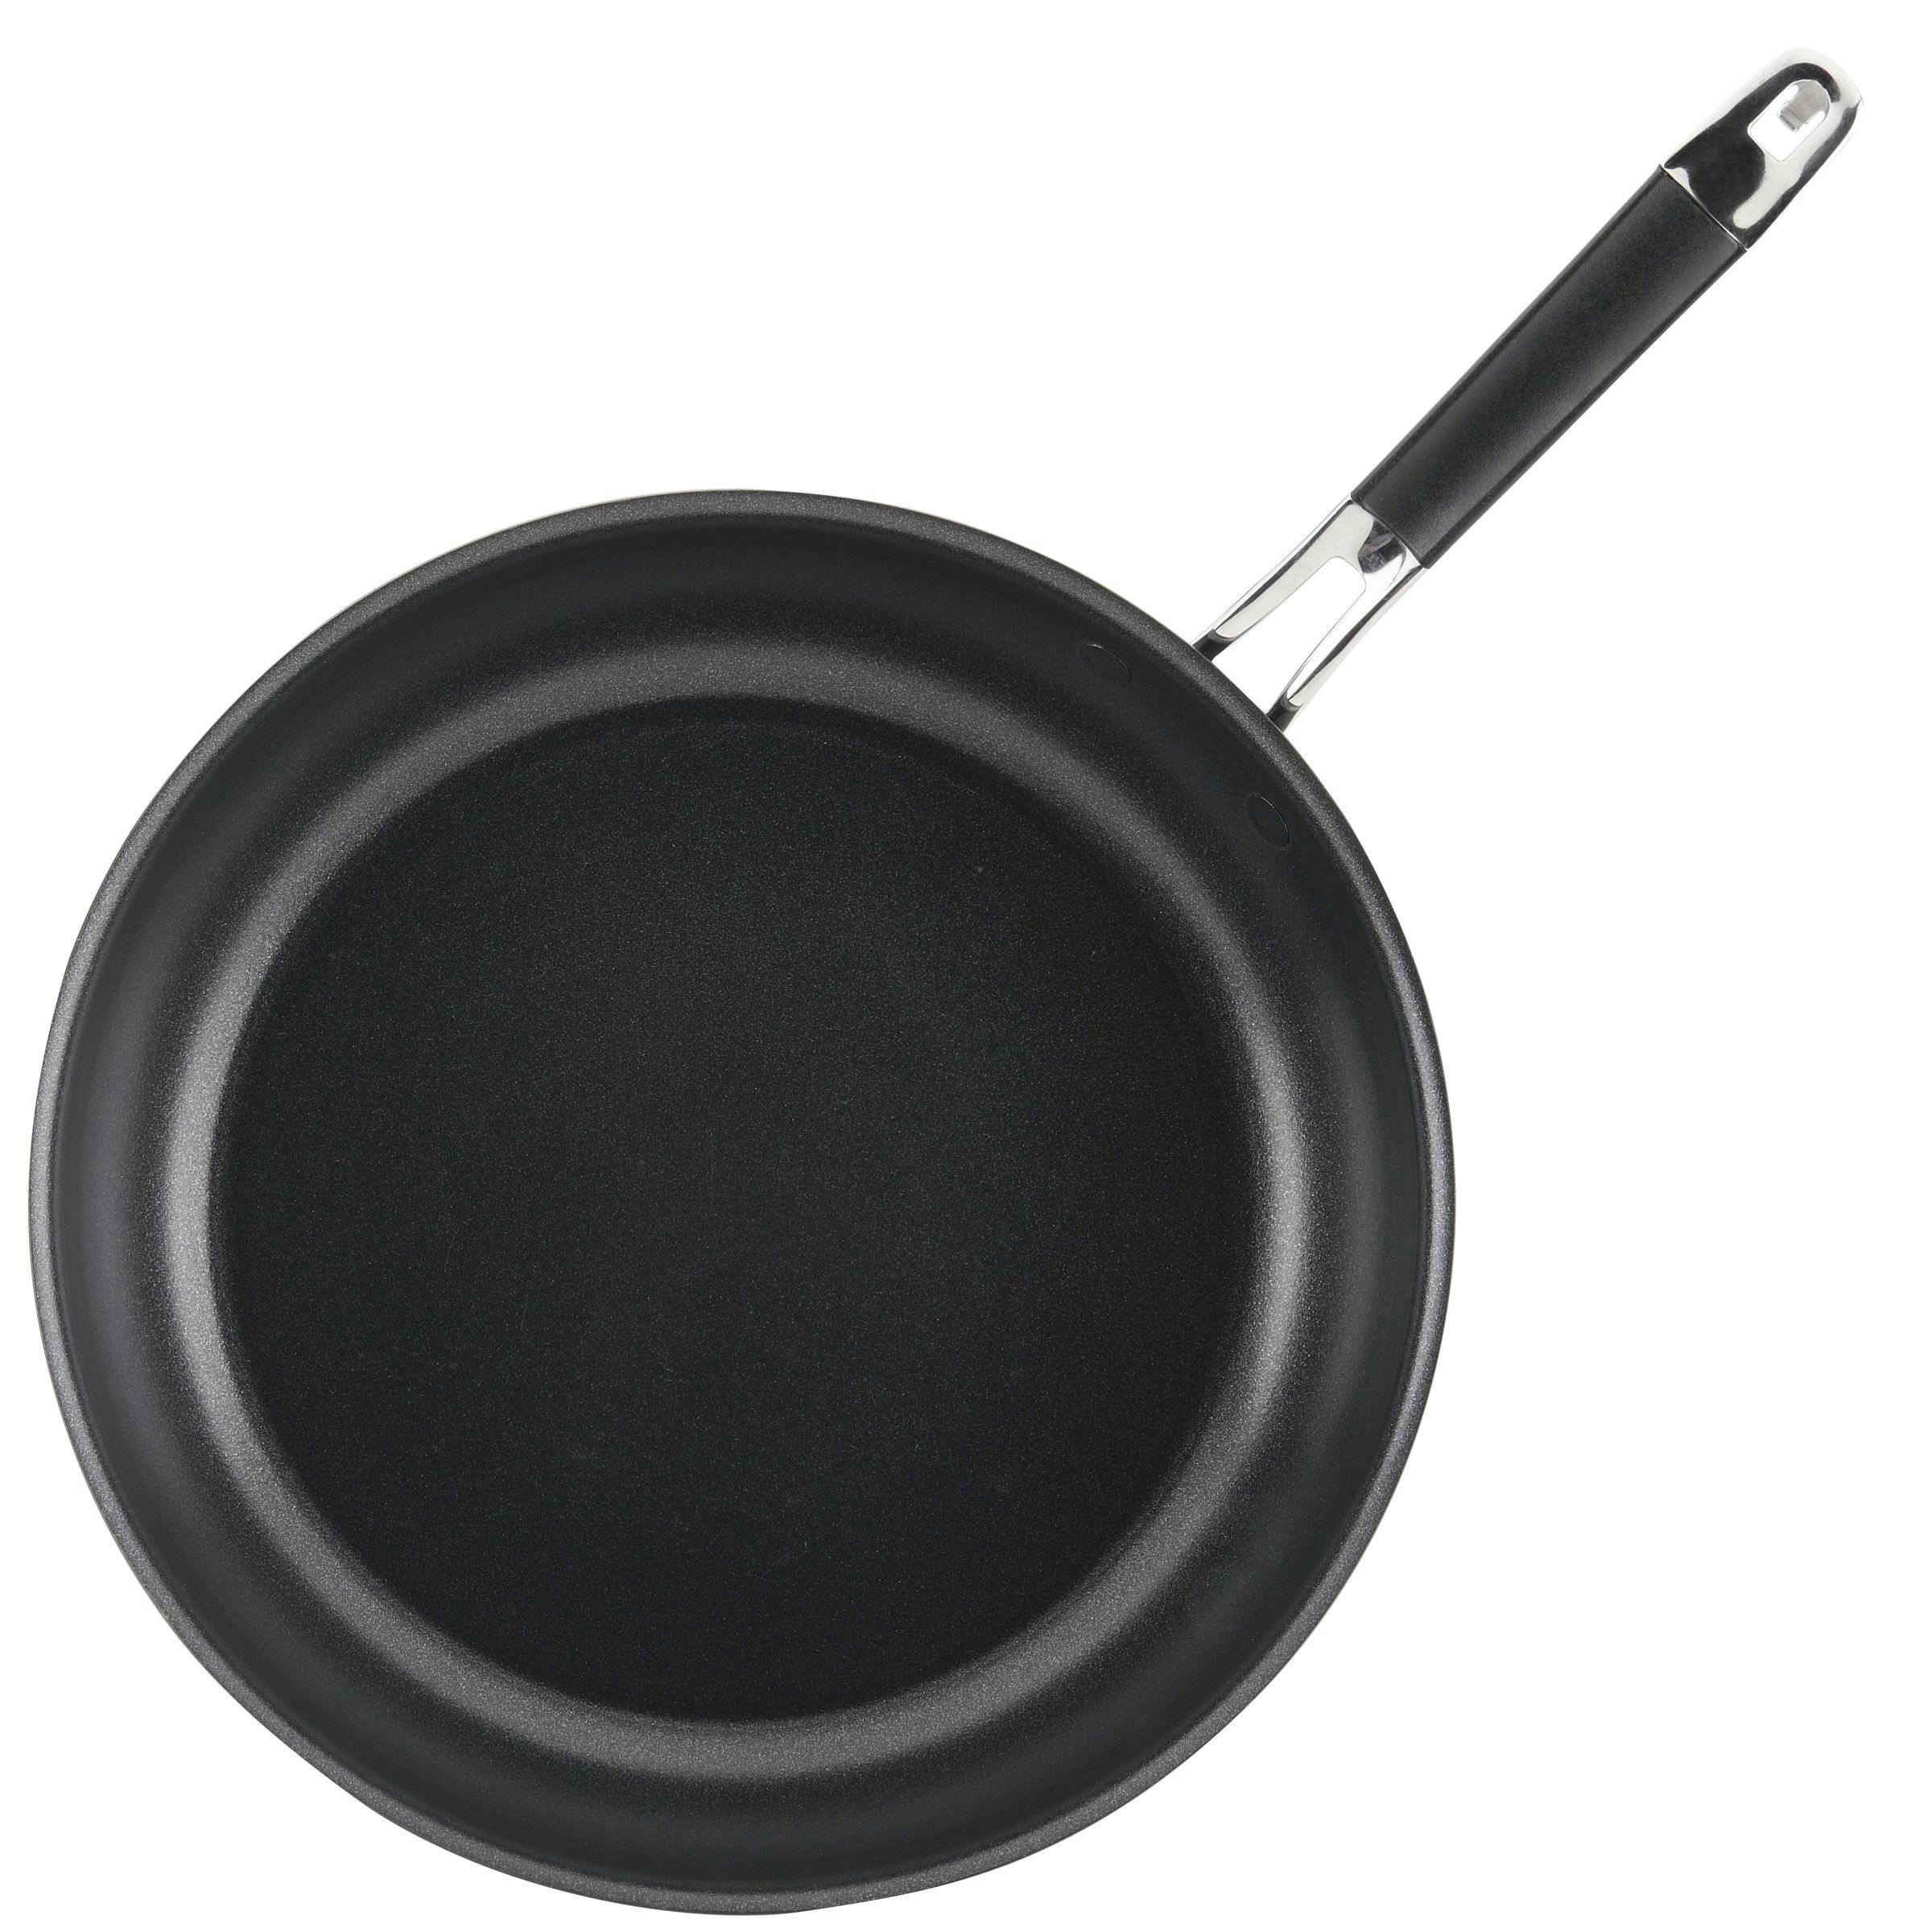 Anolon SmartStack Hard-Anodized Nonstick Induction Frying Pan, 12-inch